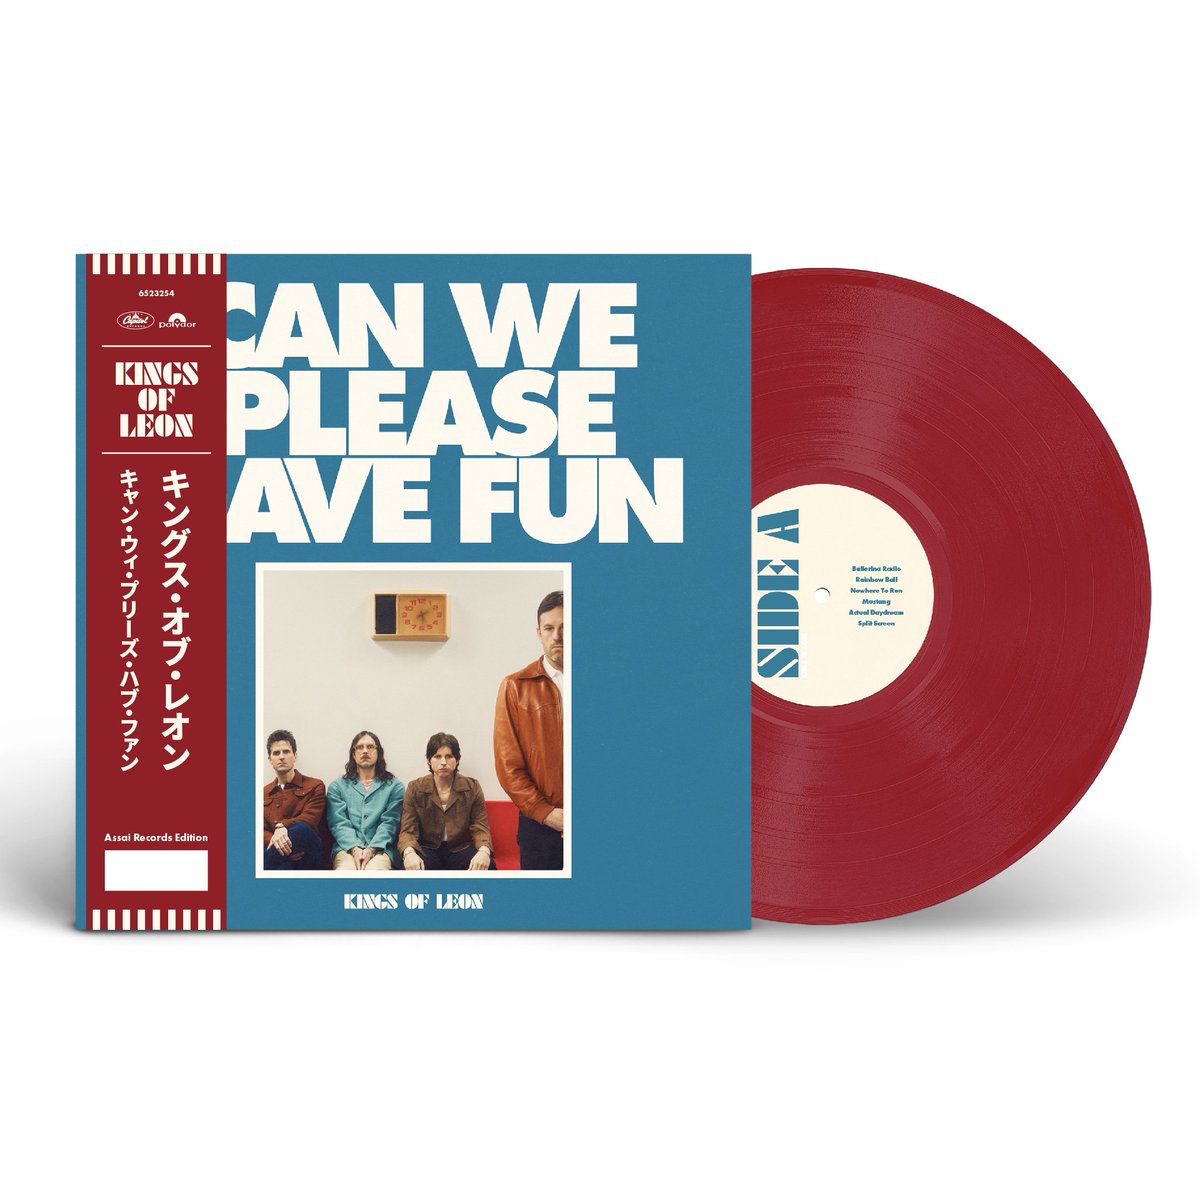 BOOM! #KINGSOFLEON OBI ANNOUNCEMENT! 📢

If you like us are enjoying the recent tunes from @KingsOfLeon, you may be pleased to know #CanWePleaseHaveFun (out May 10th)  is our latest Assai Obi Edition! 

#️⃣ Ltd. to 300

Pre-Order NOW: tinyurl.com/KOLassaiobi #kingsofleon #vinyl